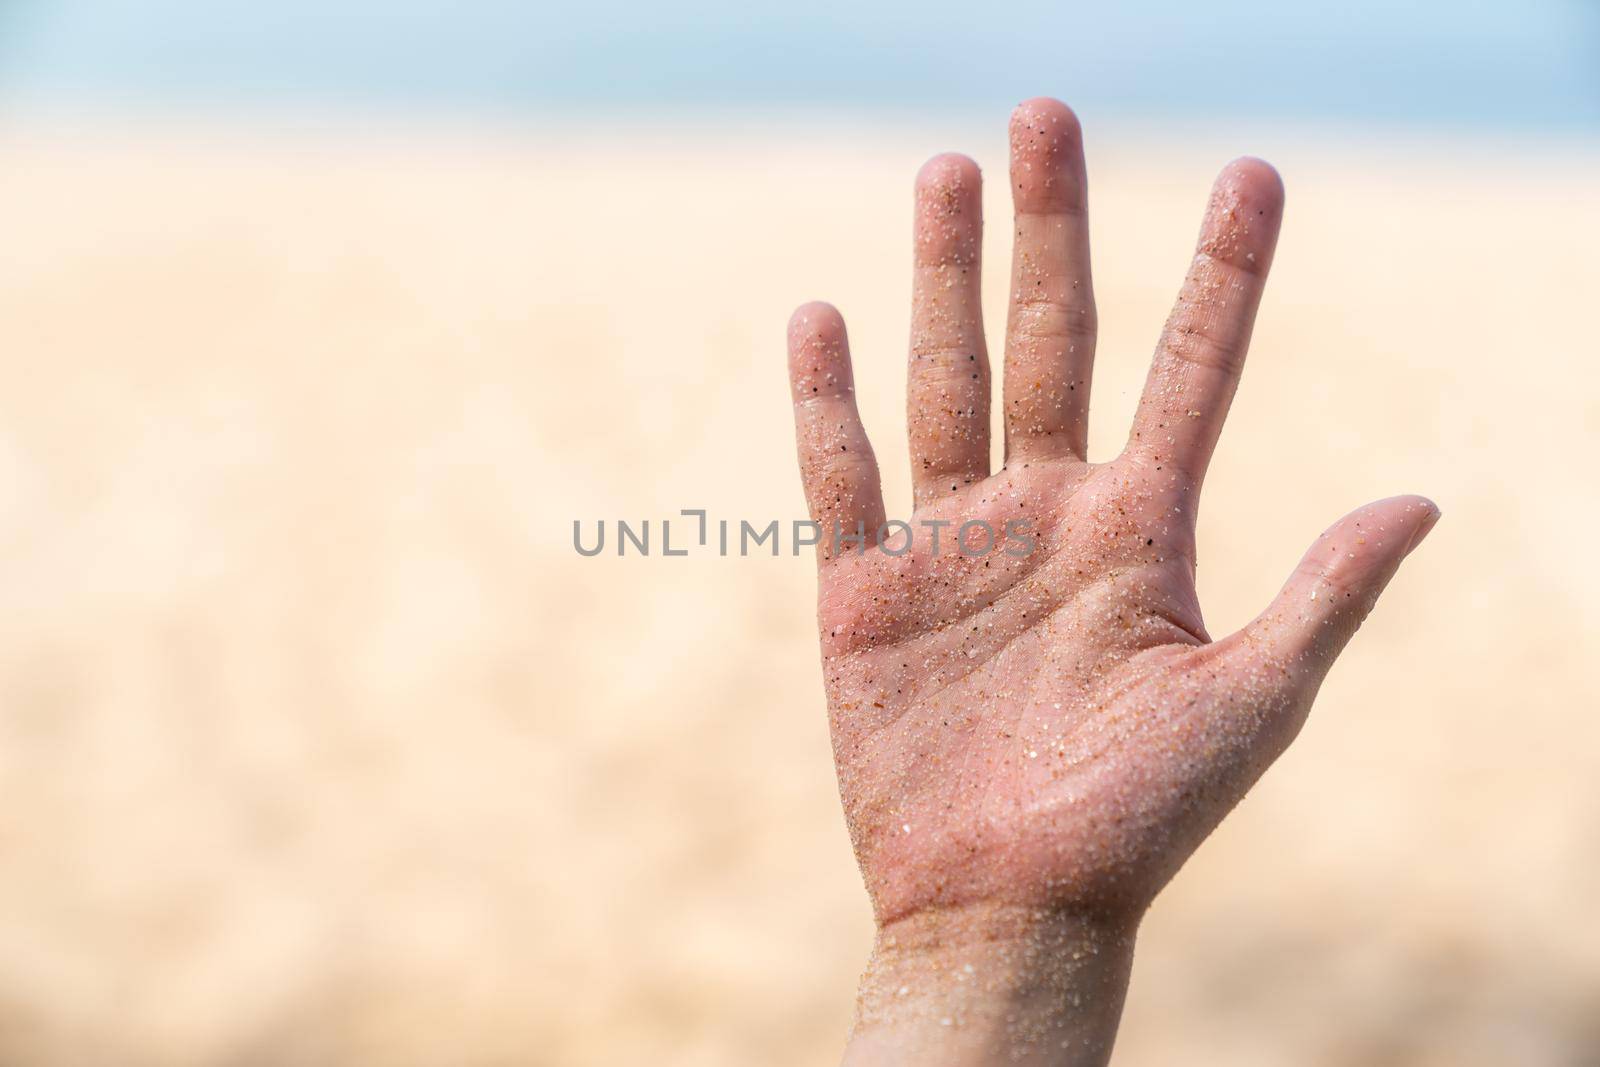 Hands stained with sand, beach and sea background.